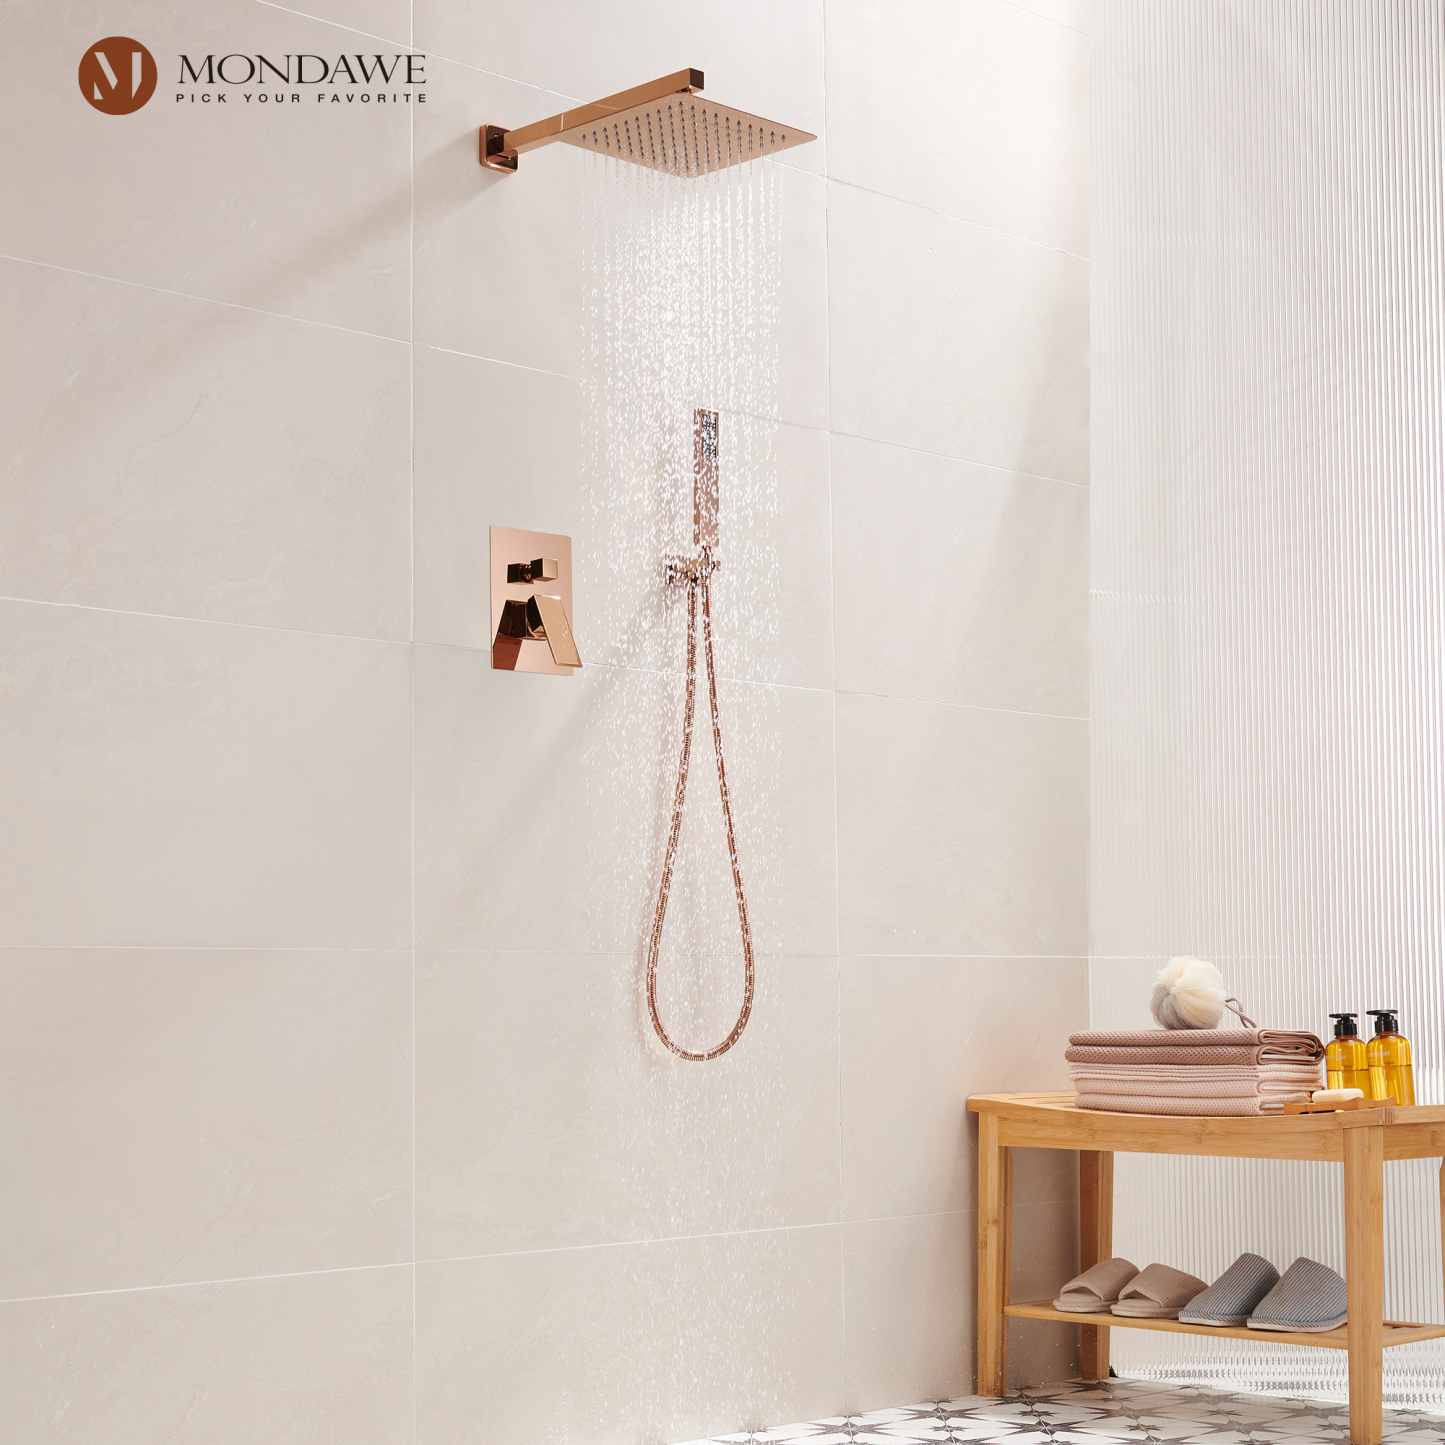 Mondawe 2 Functions Wall Mount Square Complete Shower System with 2.5 GPM 10 in Black/Rose Gold-Mondawe